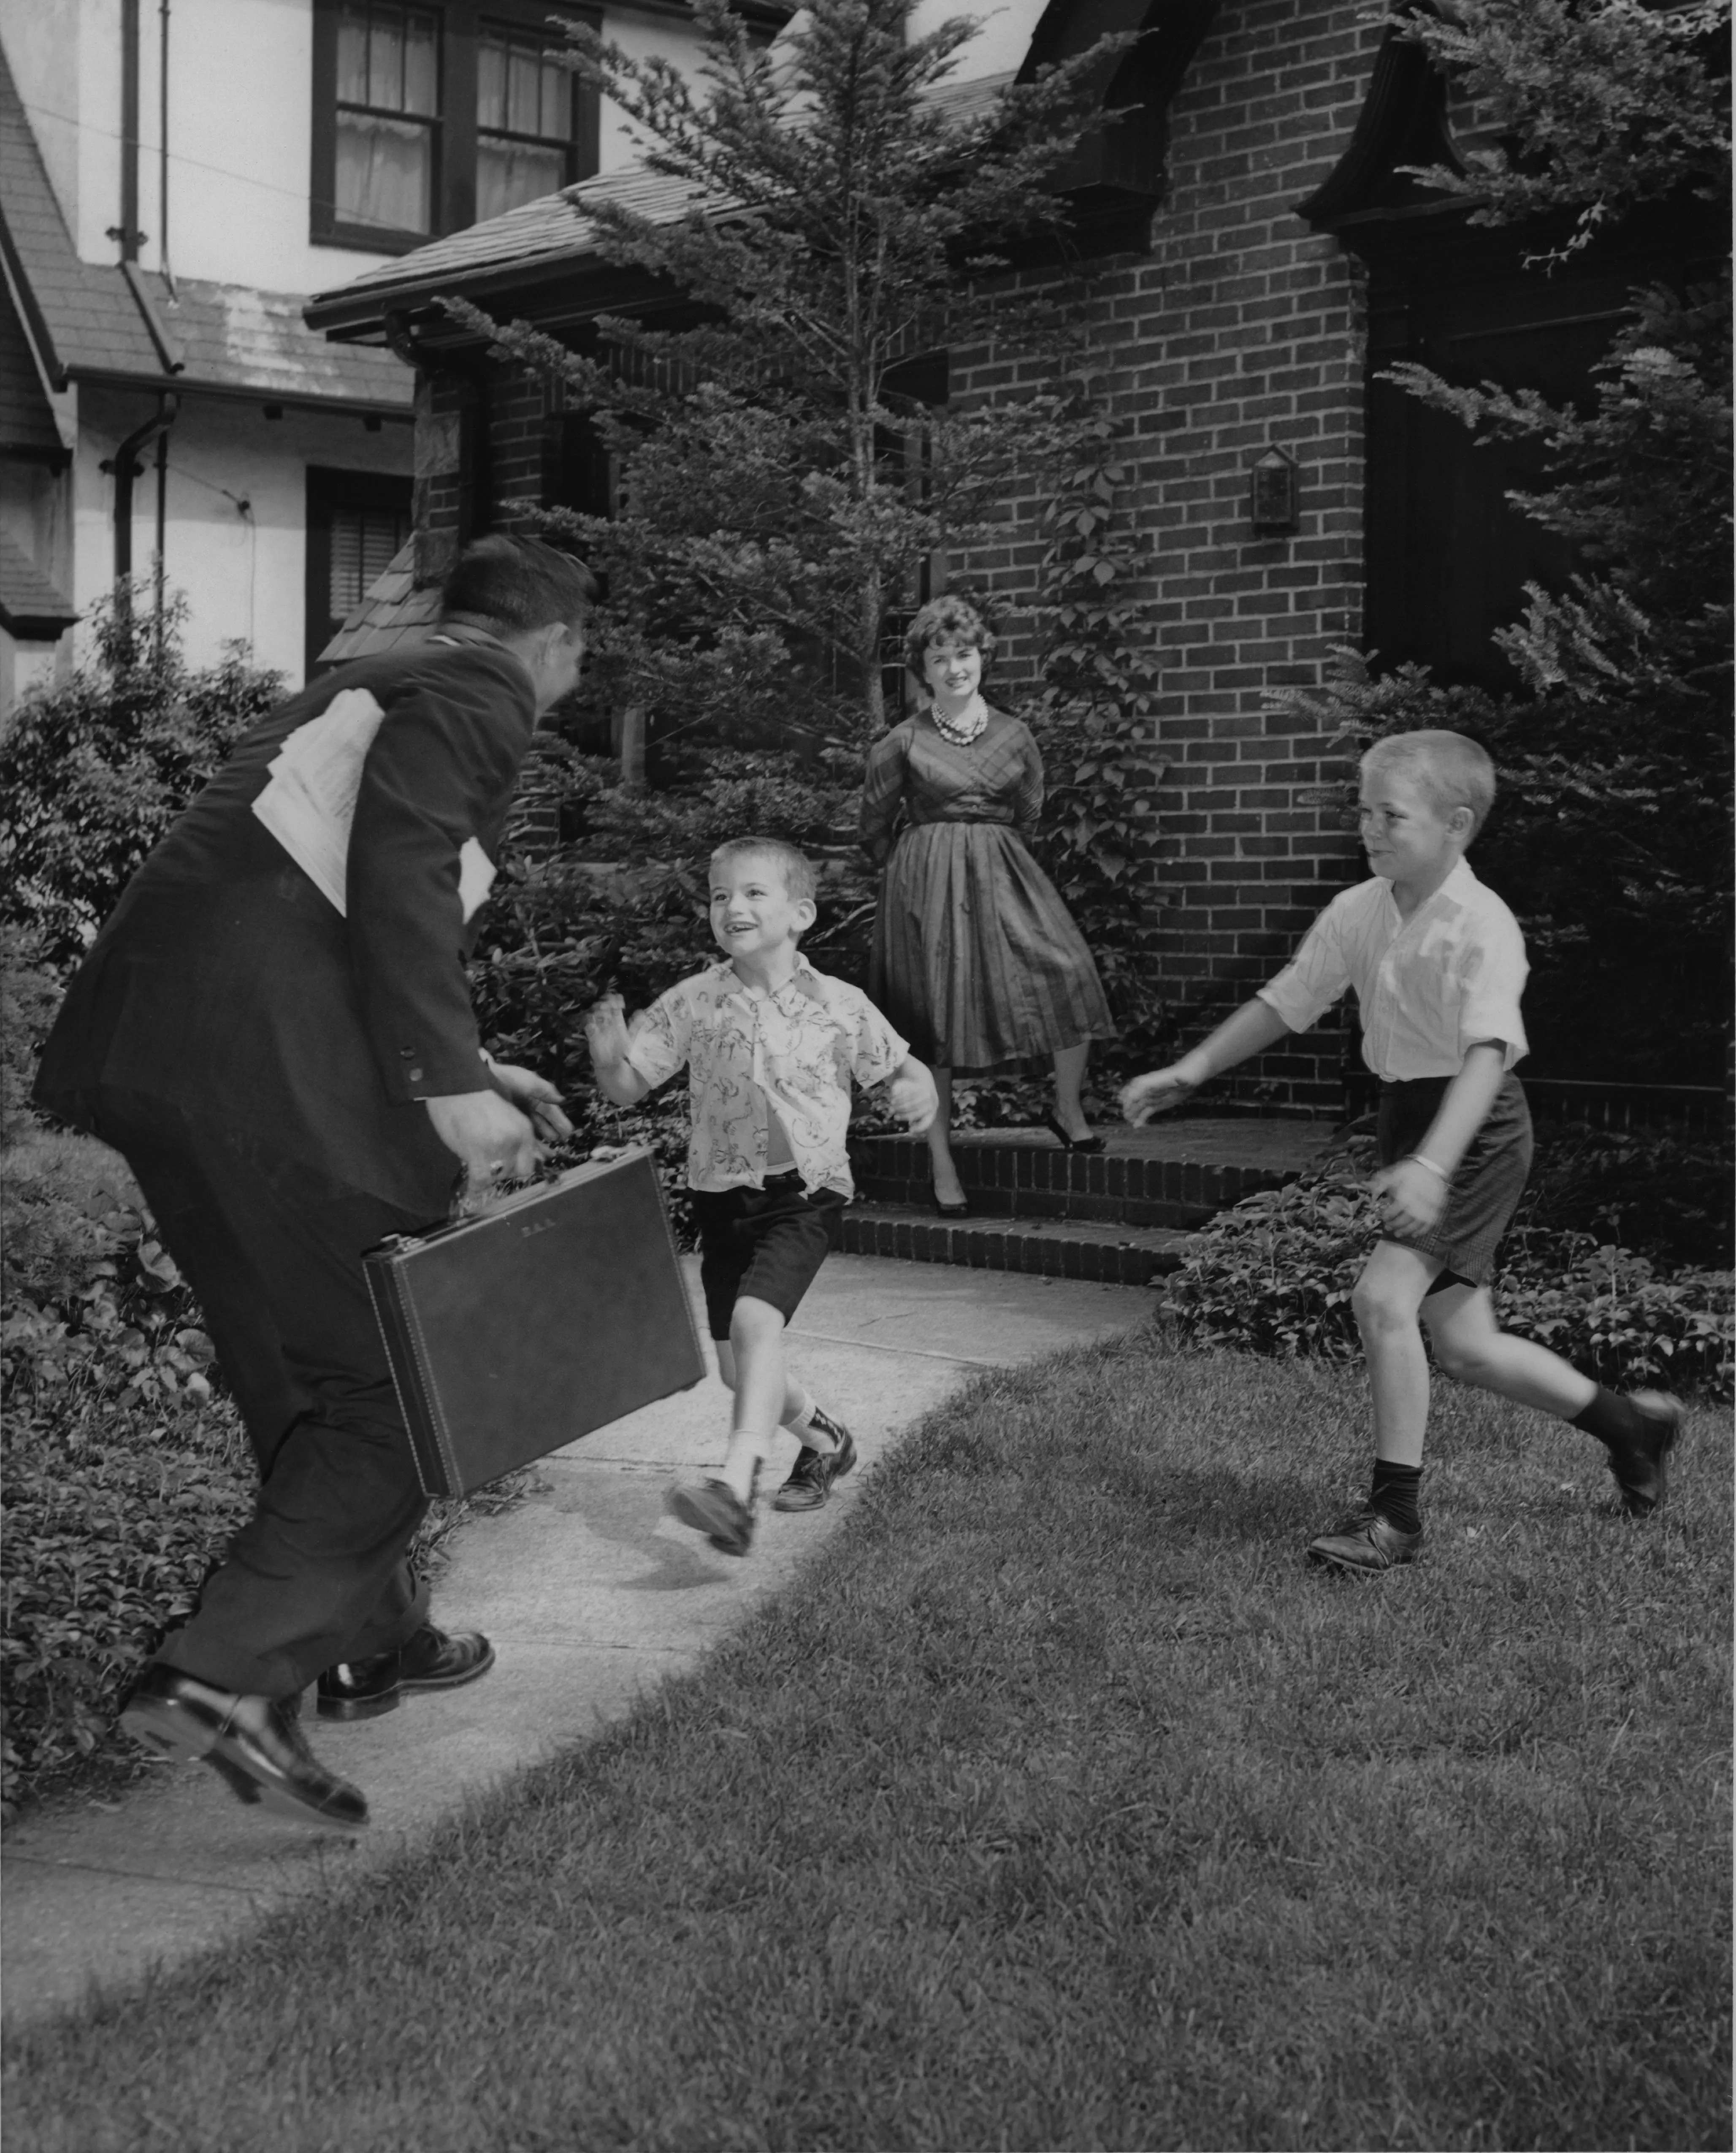 Two young boys in shorts run to greet Dad coming home from work while Mother is standing in the background. Circa 1960